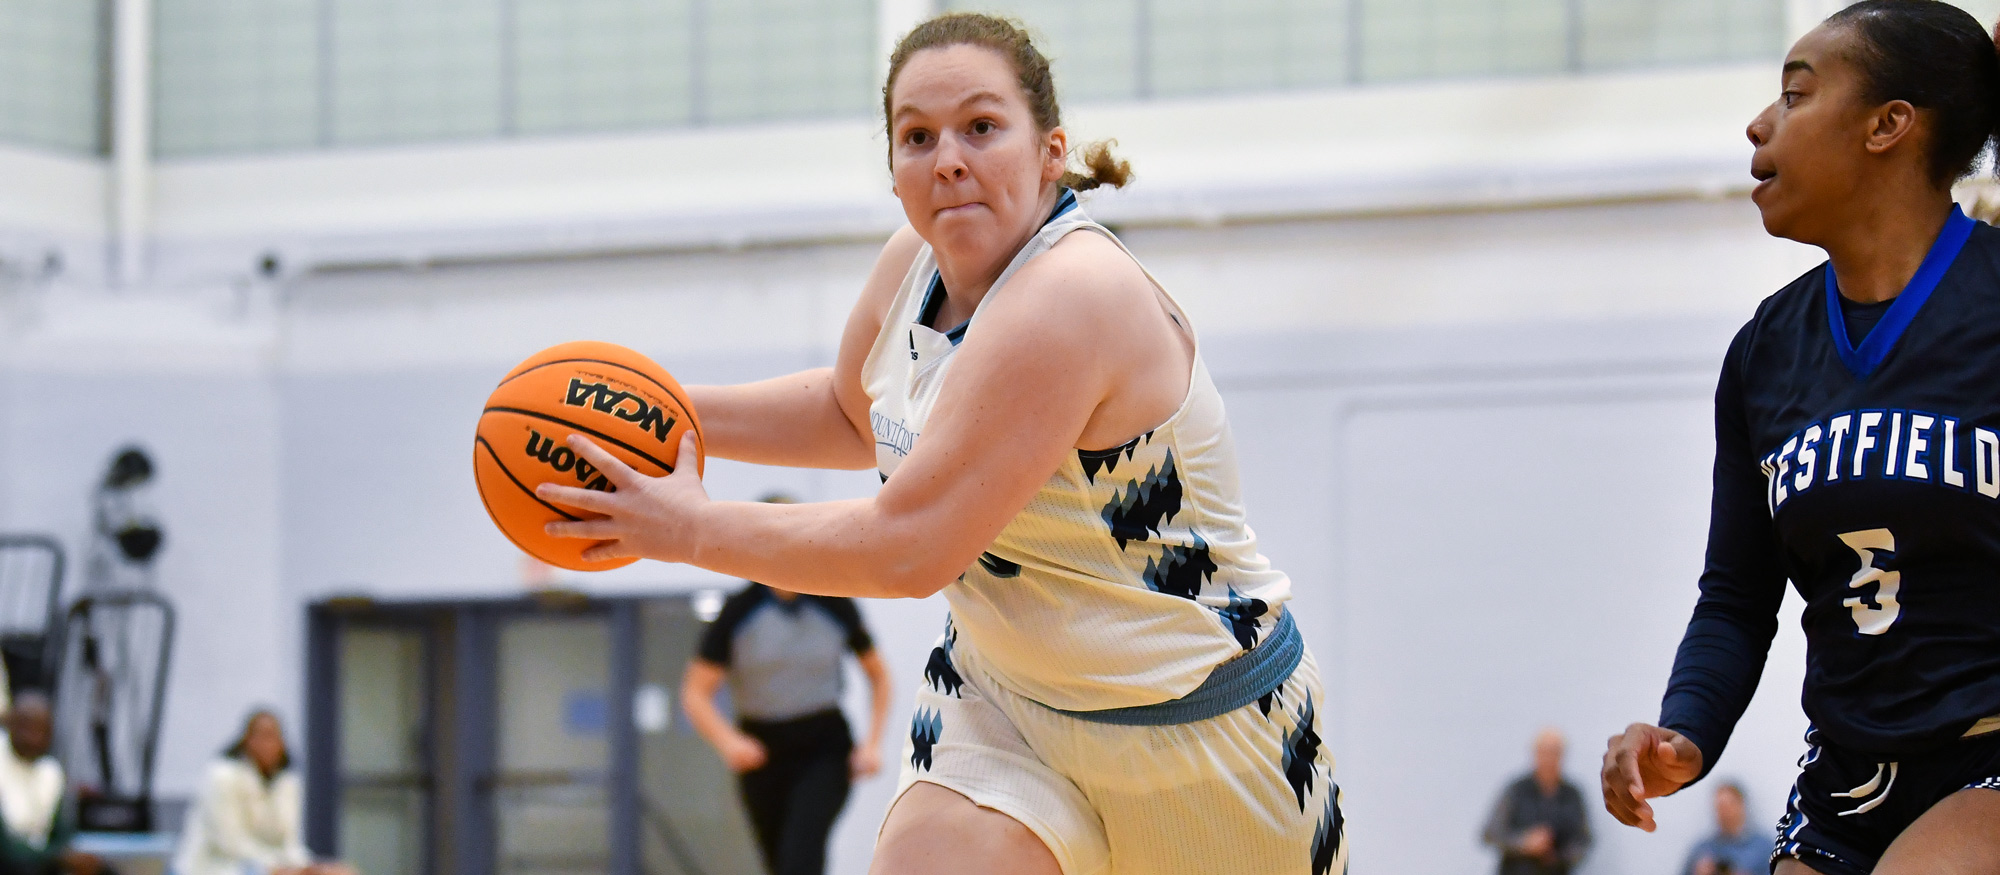 Emily Mock scored five points on perfect shooting from off the bench in Mount Holyoke's loss to Adrian College on Dec. 29, 2022 in Puerto Rico. (RJB Sports file photo)